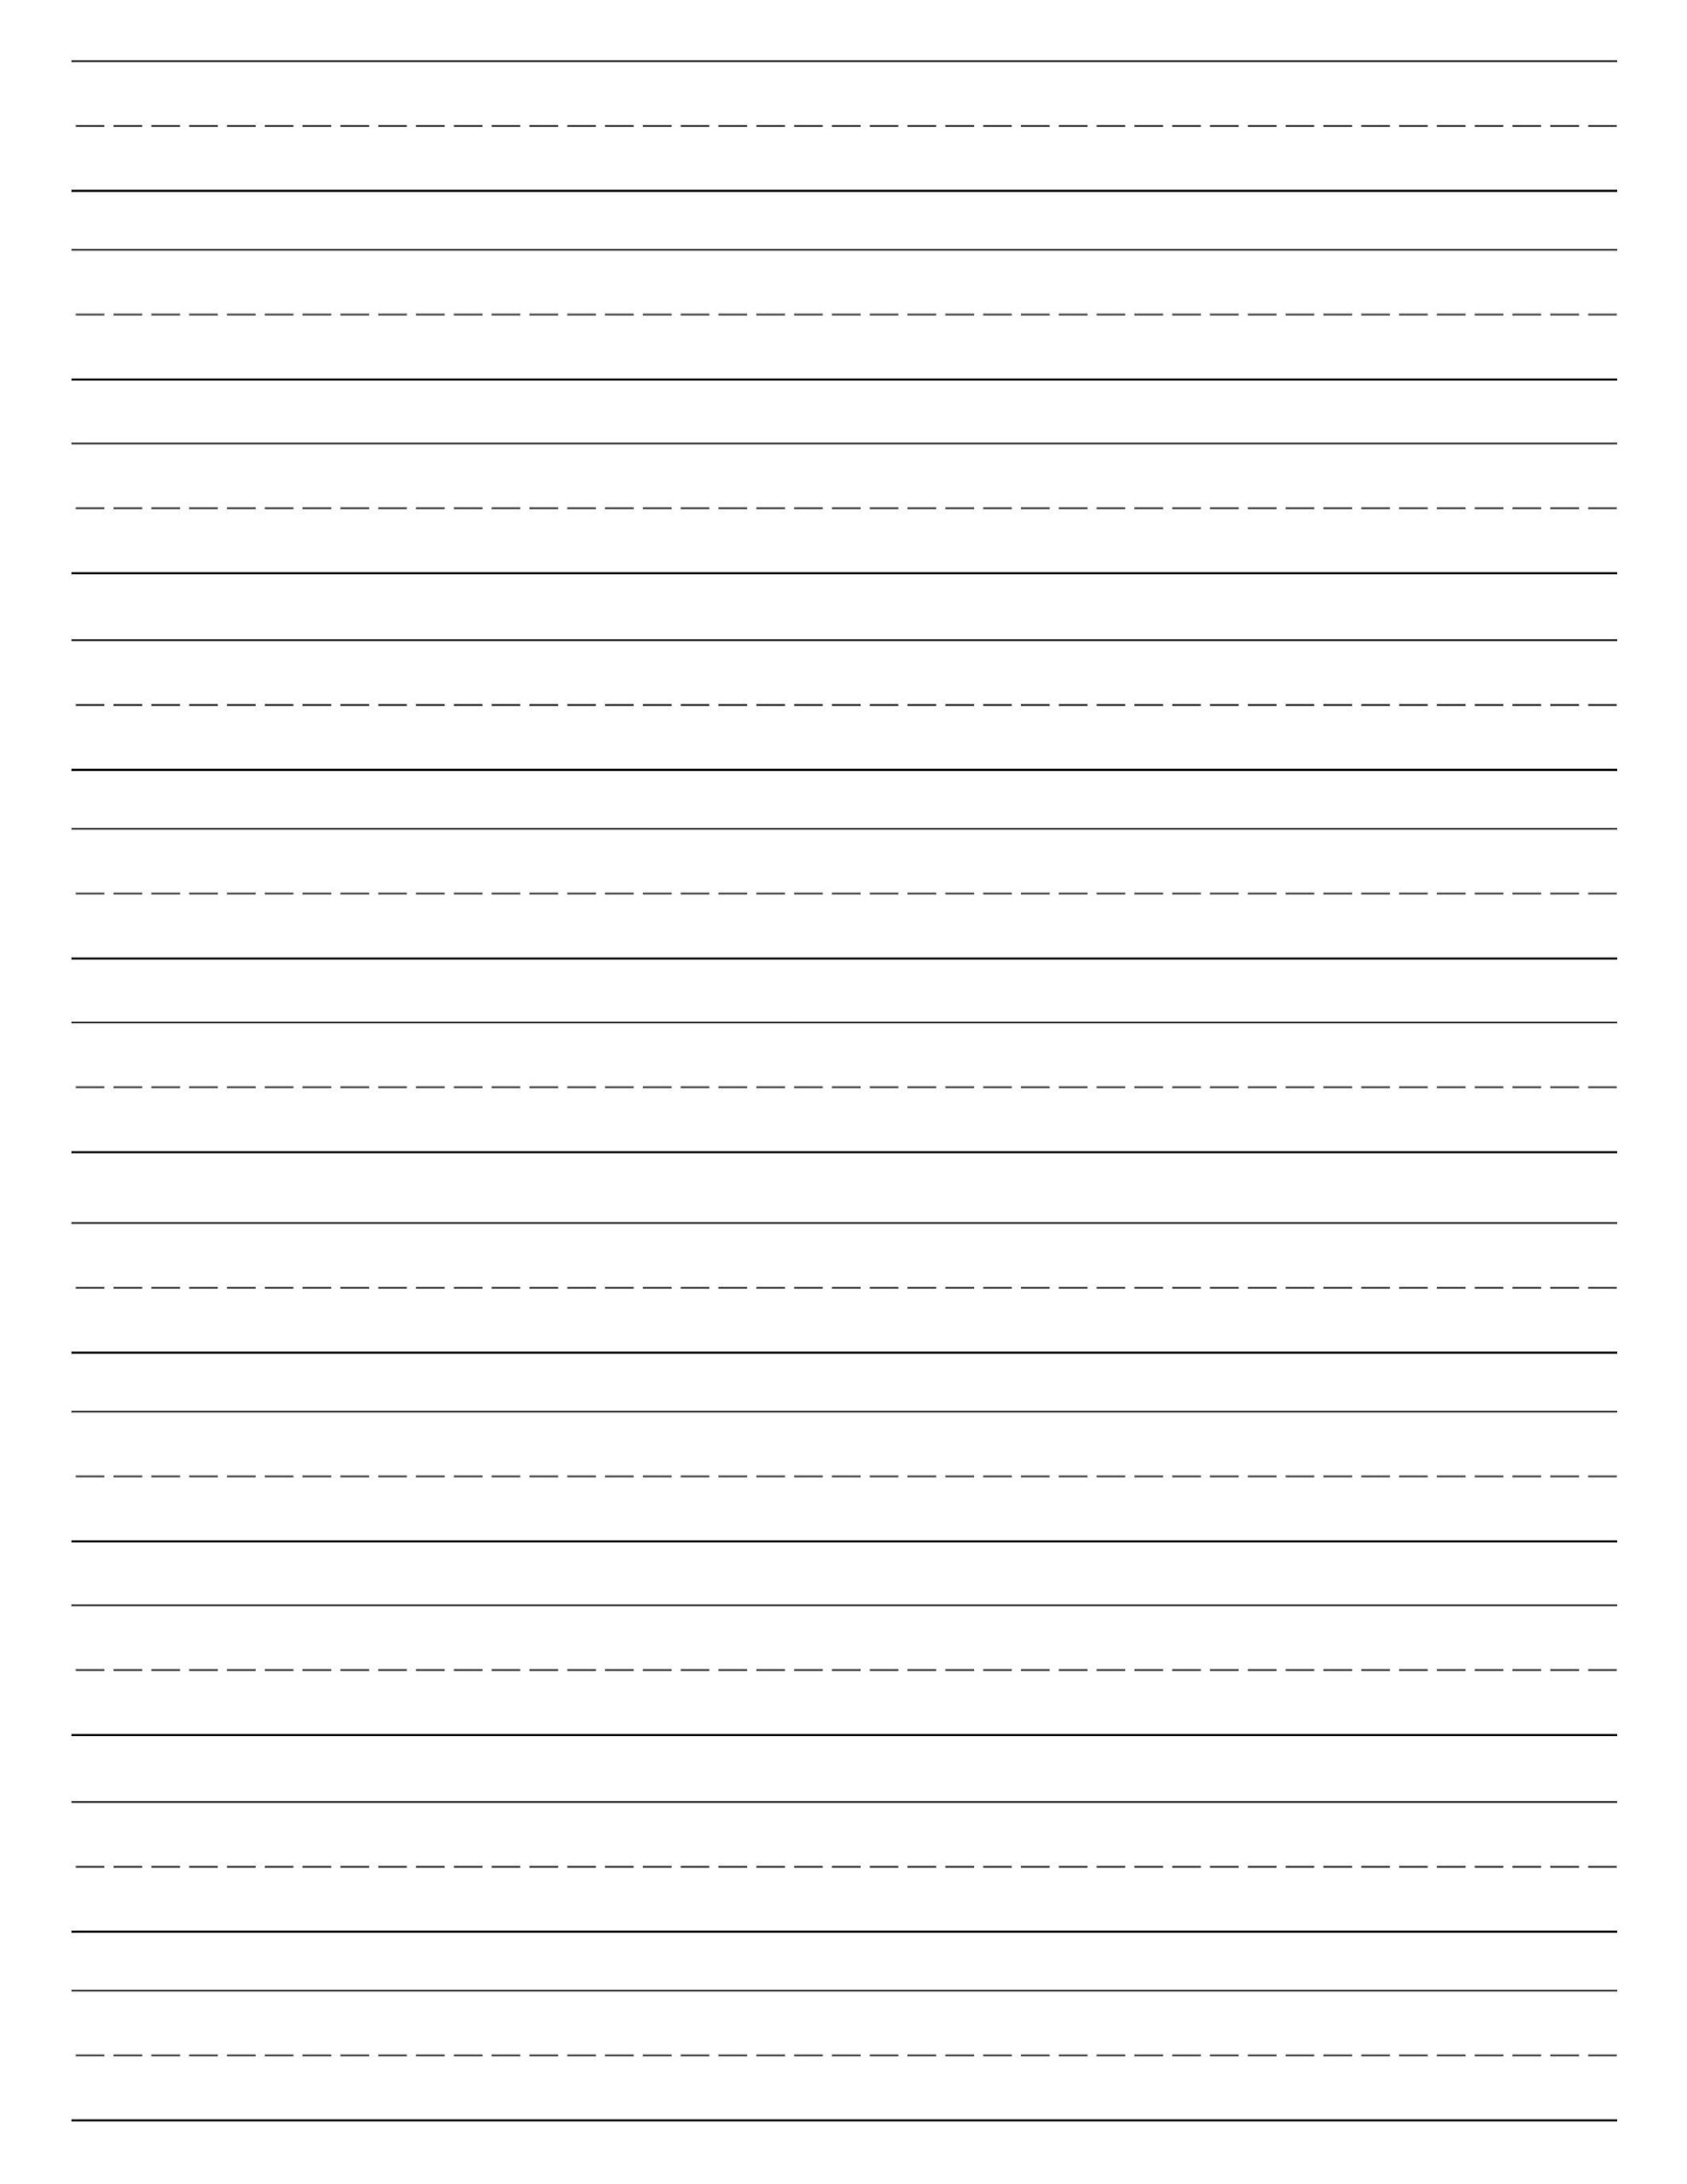 Fall Lined Writing Paper a4 Landscape Lined Paper Template A4 Free 